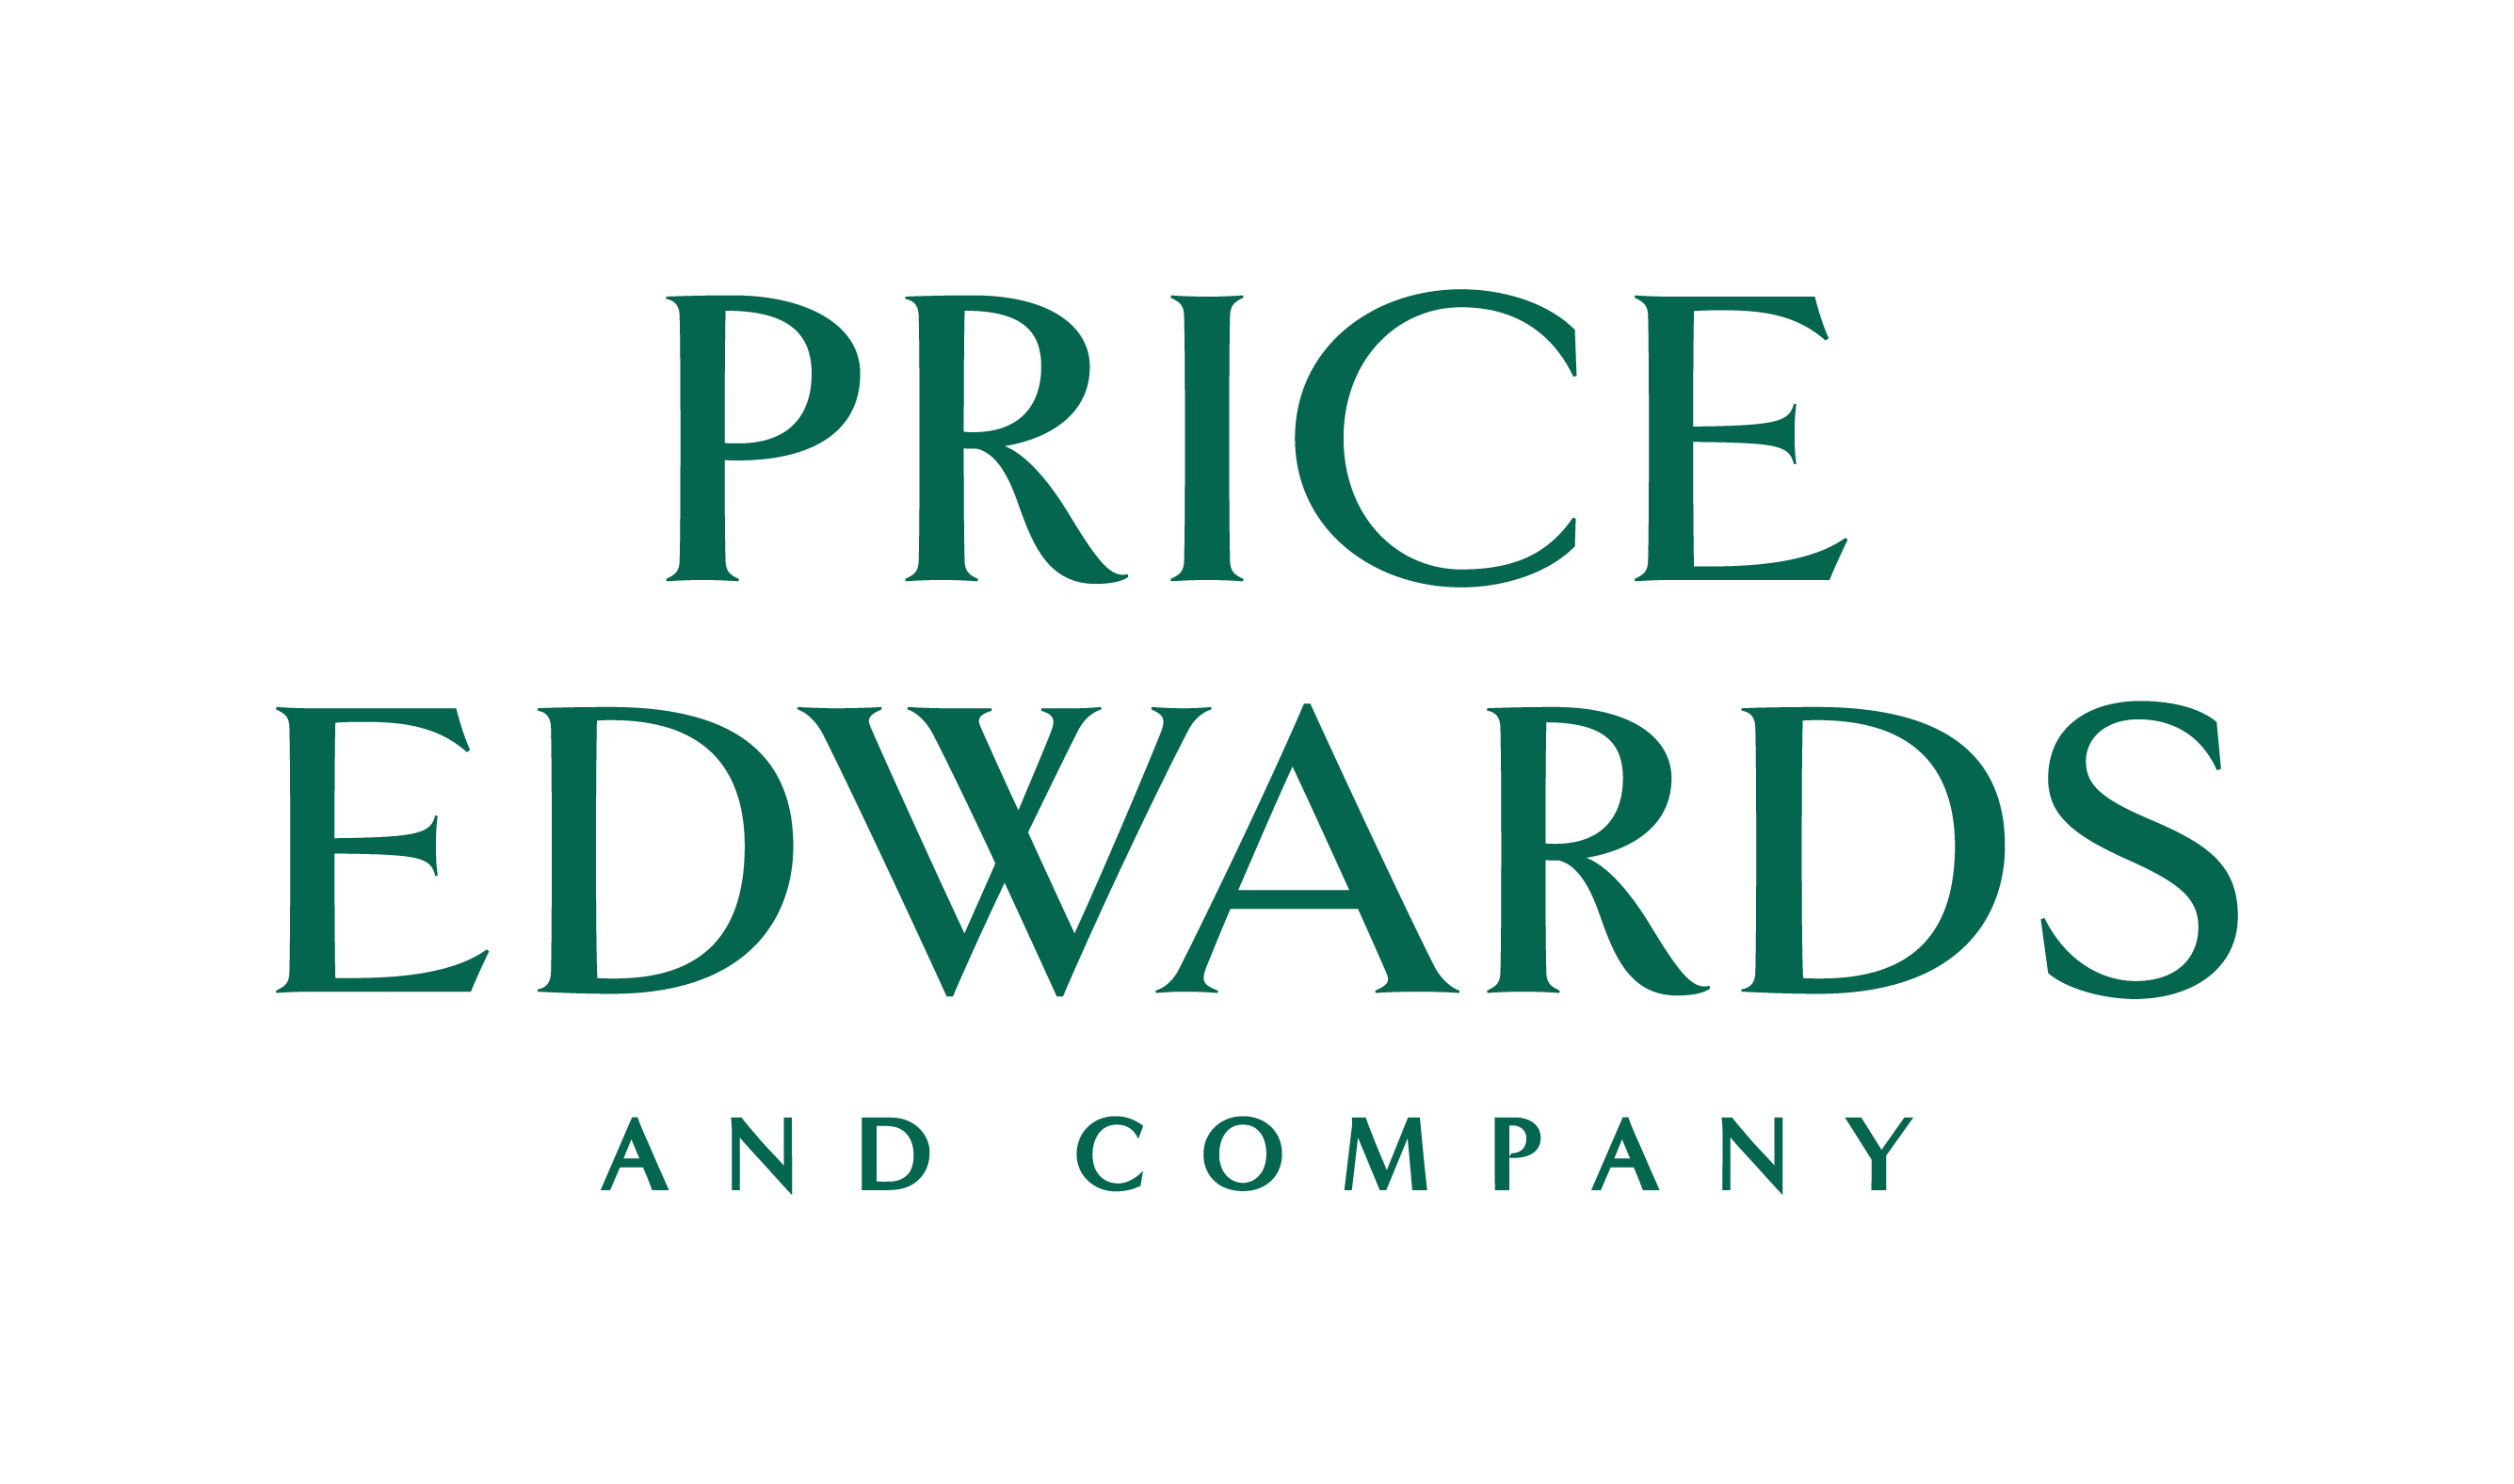 Price Edwards and Company